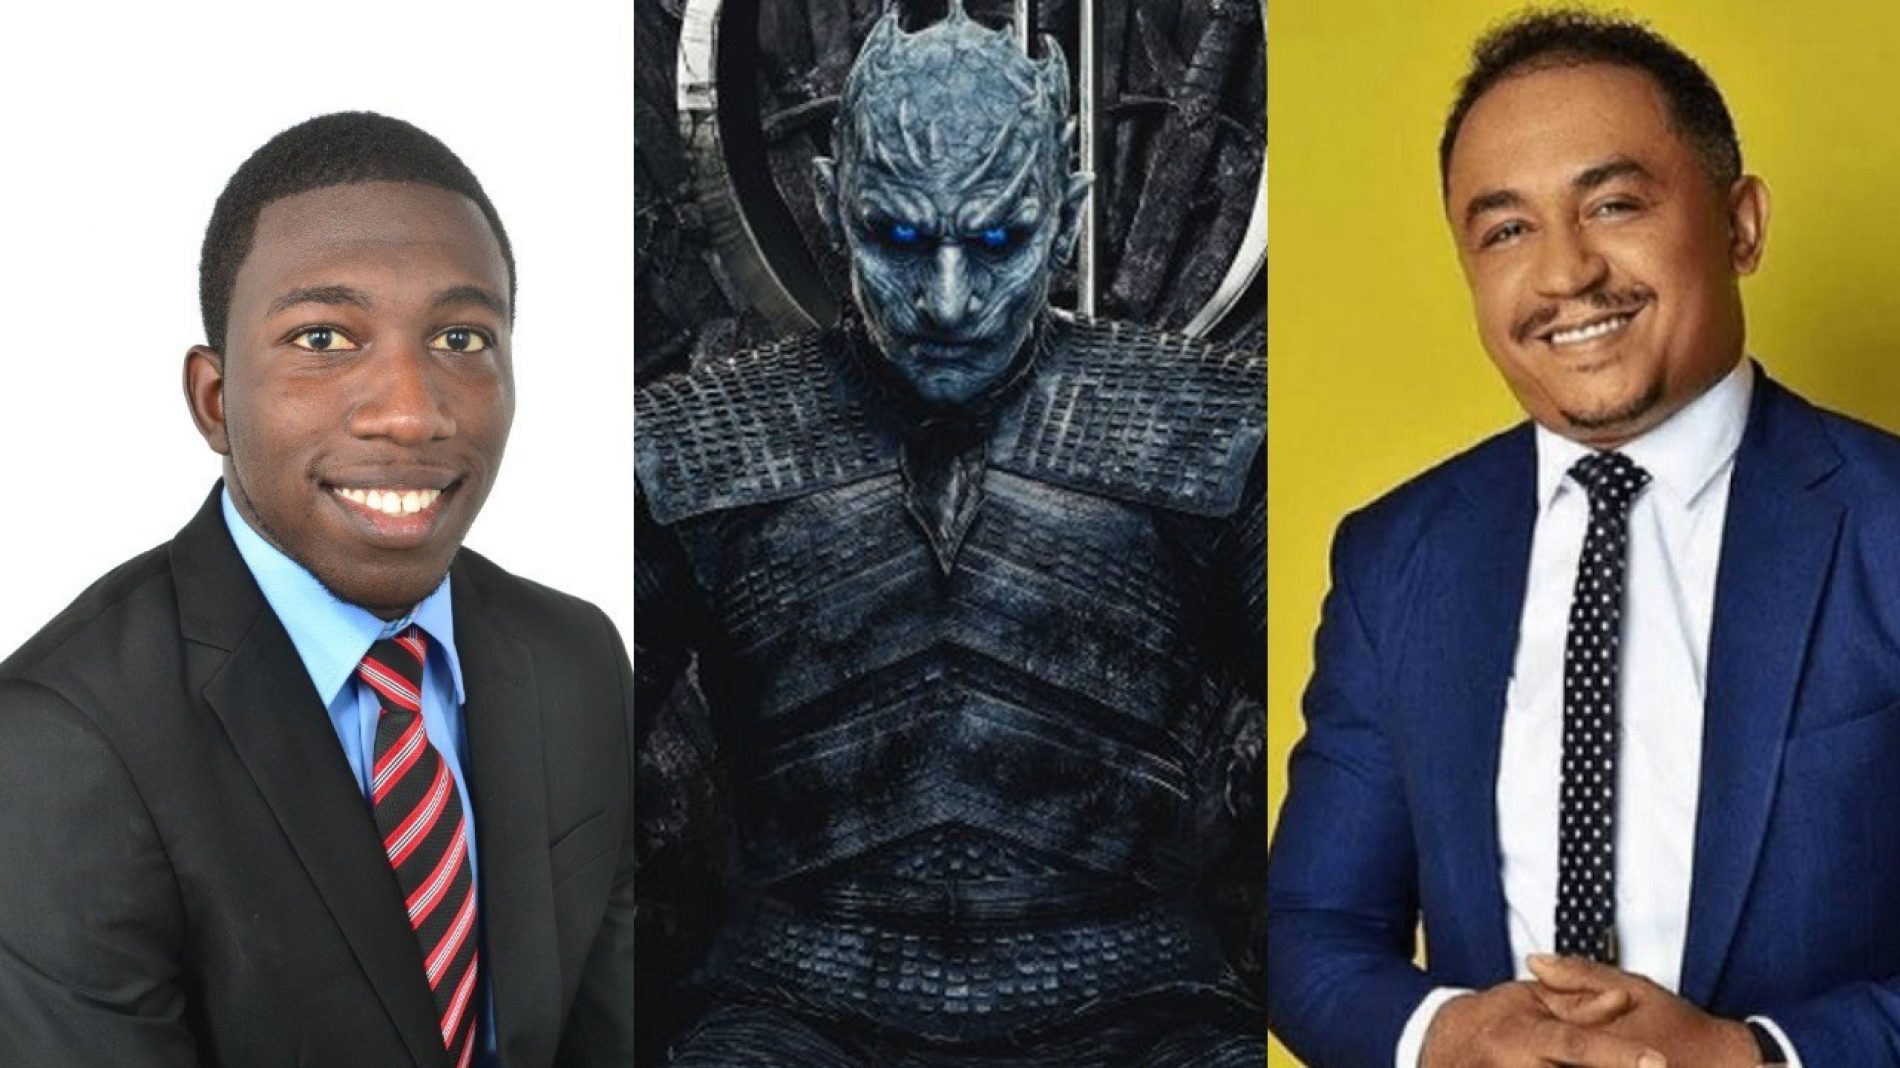 Pastor slams those who watch Game of Thrones | Daddy Freeze slams him in return for his hypocrisy